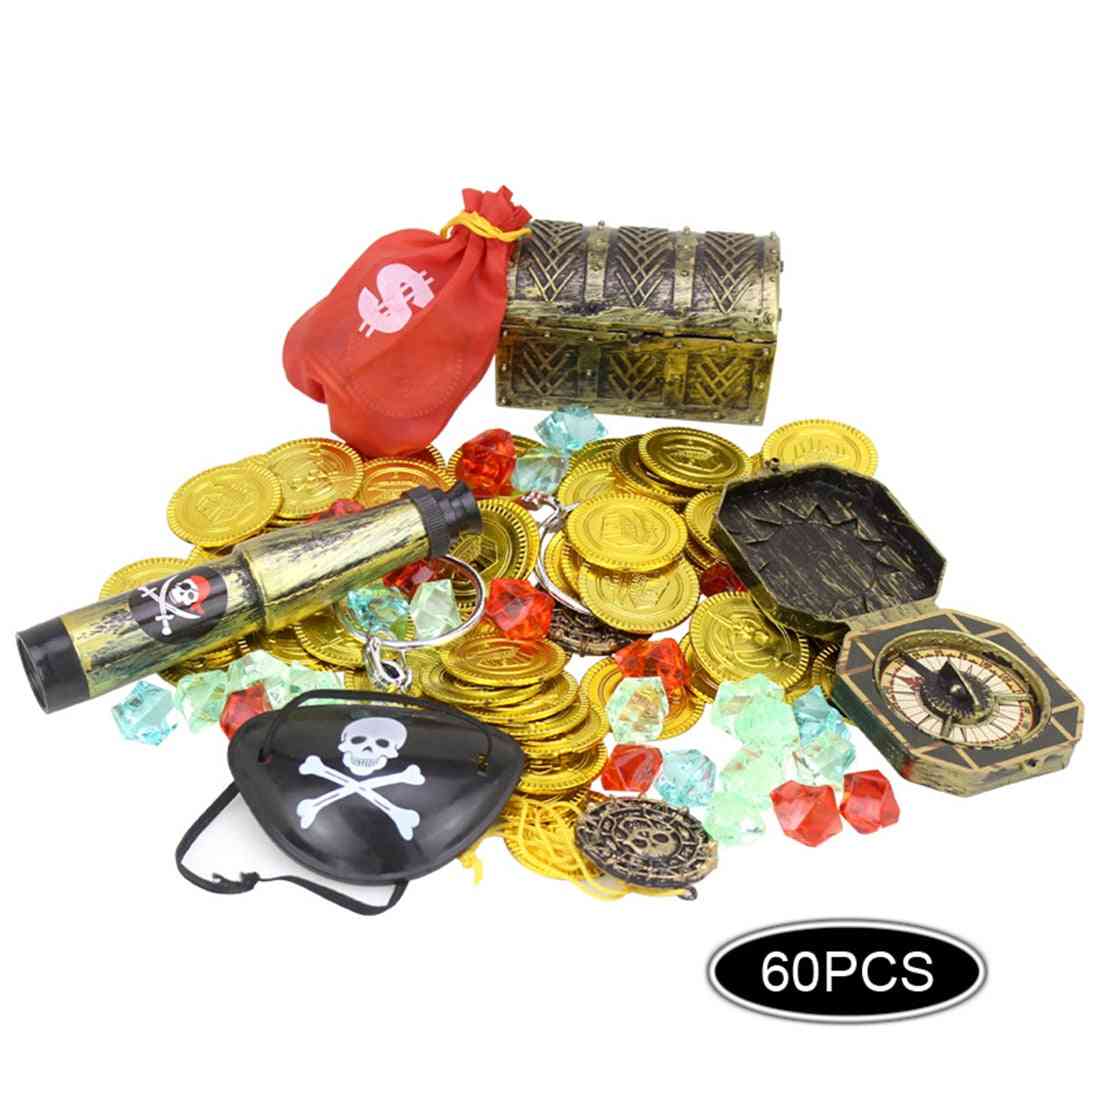 60pcs Pirates  Set Pirate Cover Gold Coins Pirate -treasure Box Kid's Party Supply